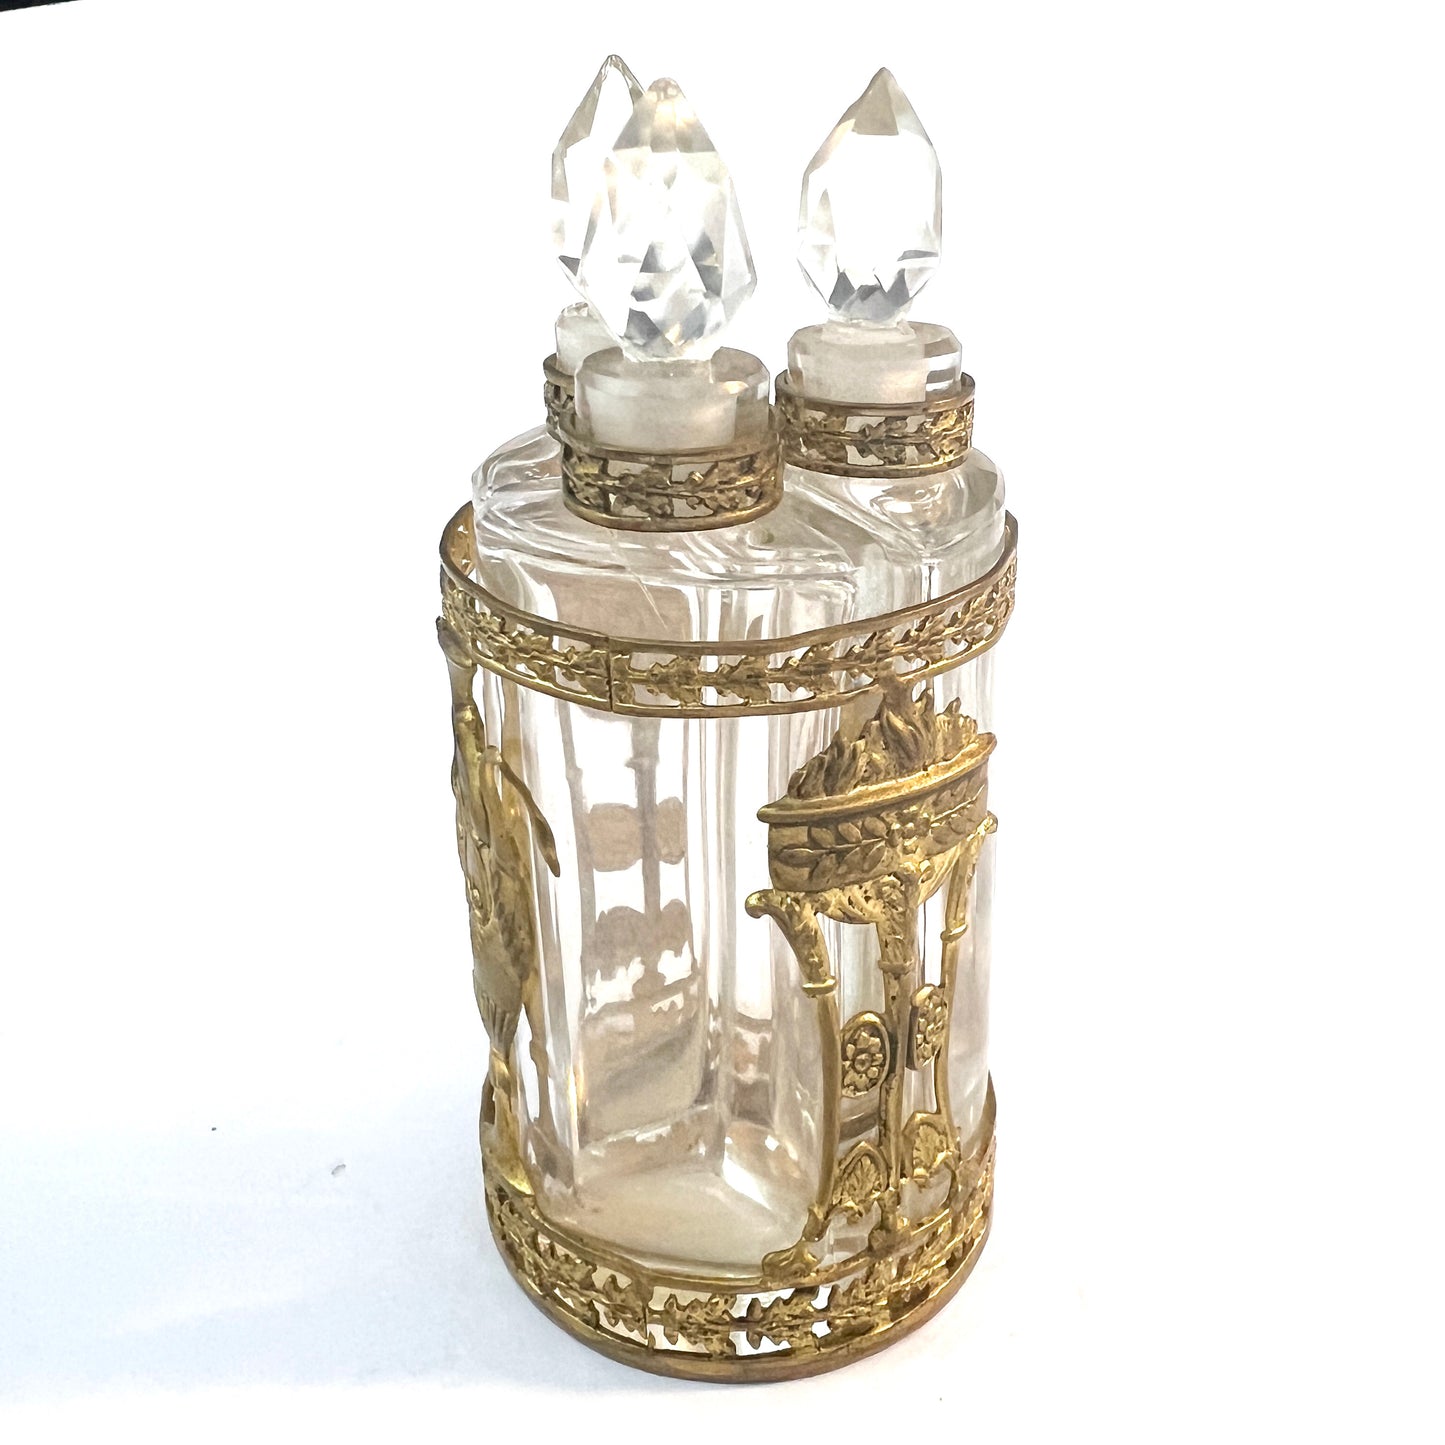 France c 1870 Bronze Crystal Glass Dressing Table Perfume Bottles with Stand. Museum Exhibition Provenance